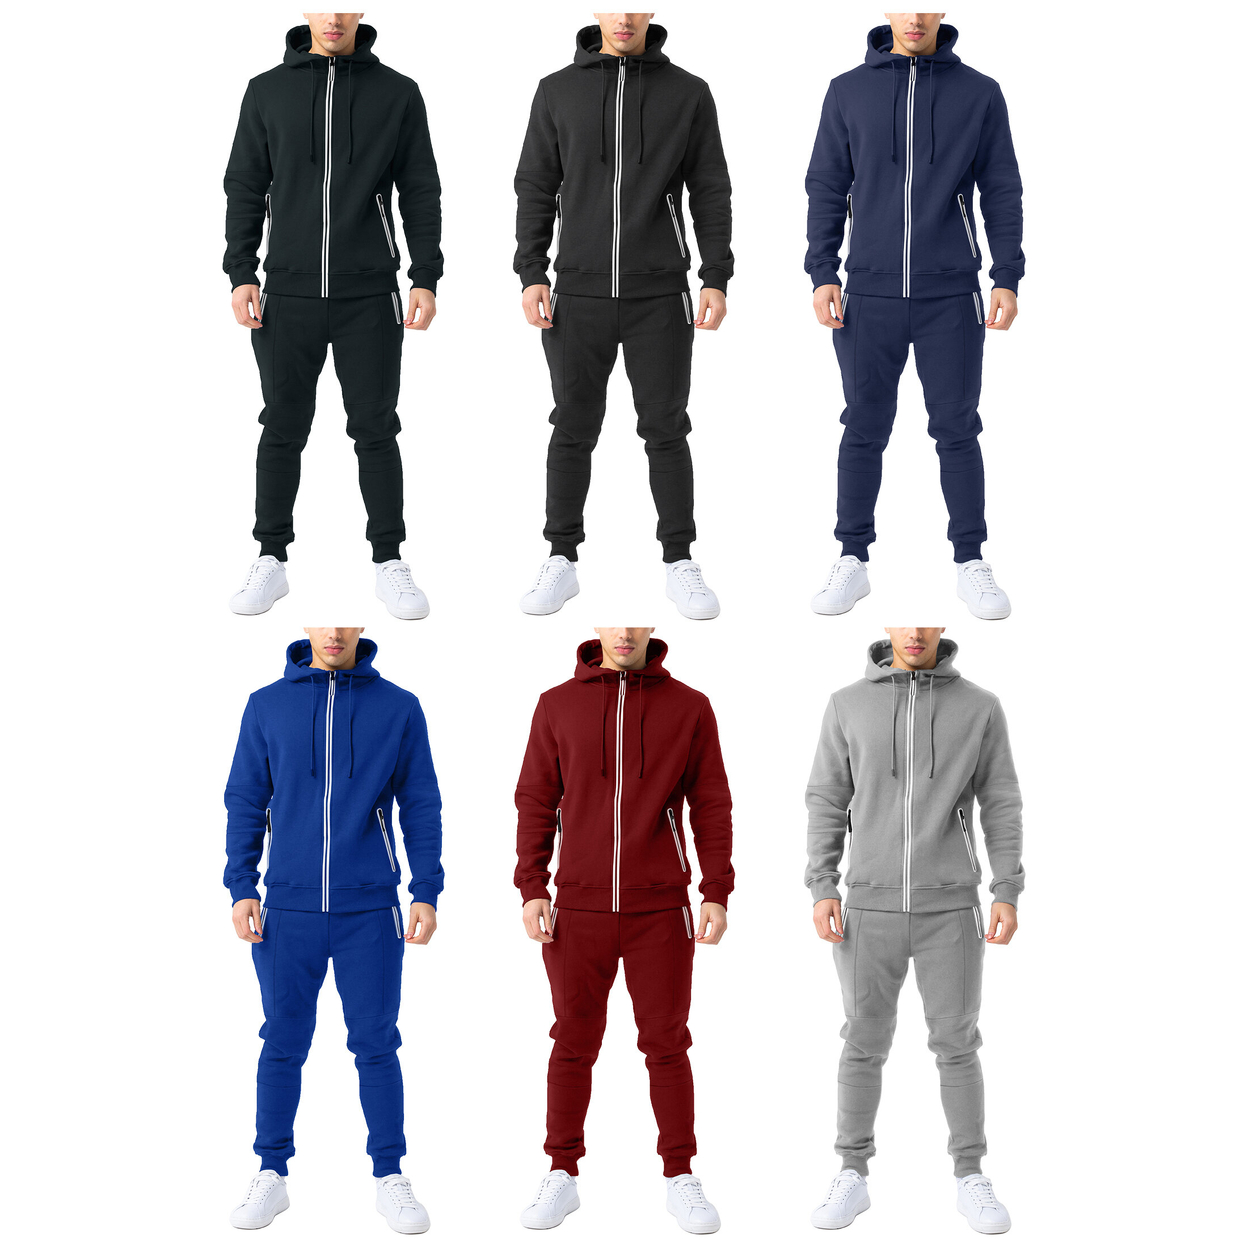 2-Pack: Men's Cozy Slim Fit Active Athletic Full Zip Hoodie And Jogger Tracksuit - Blue & Blue, Small